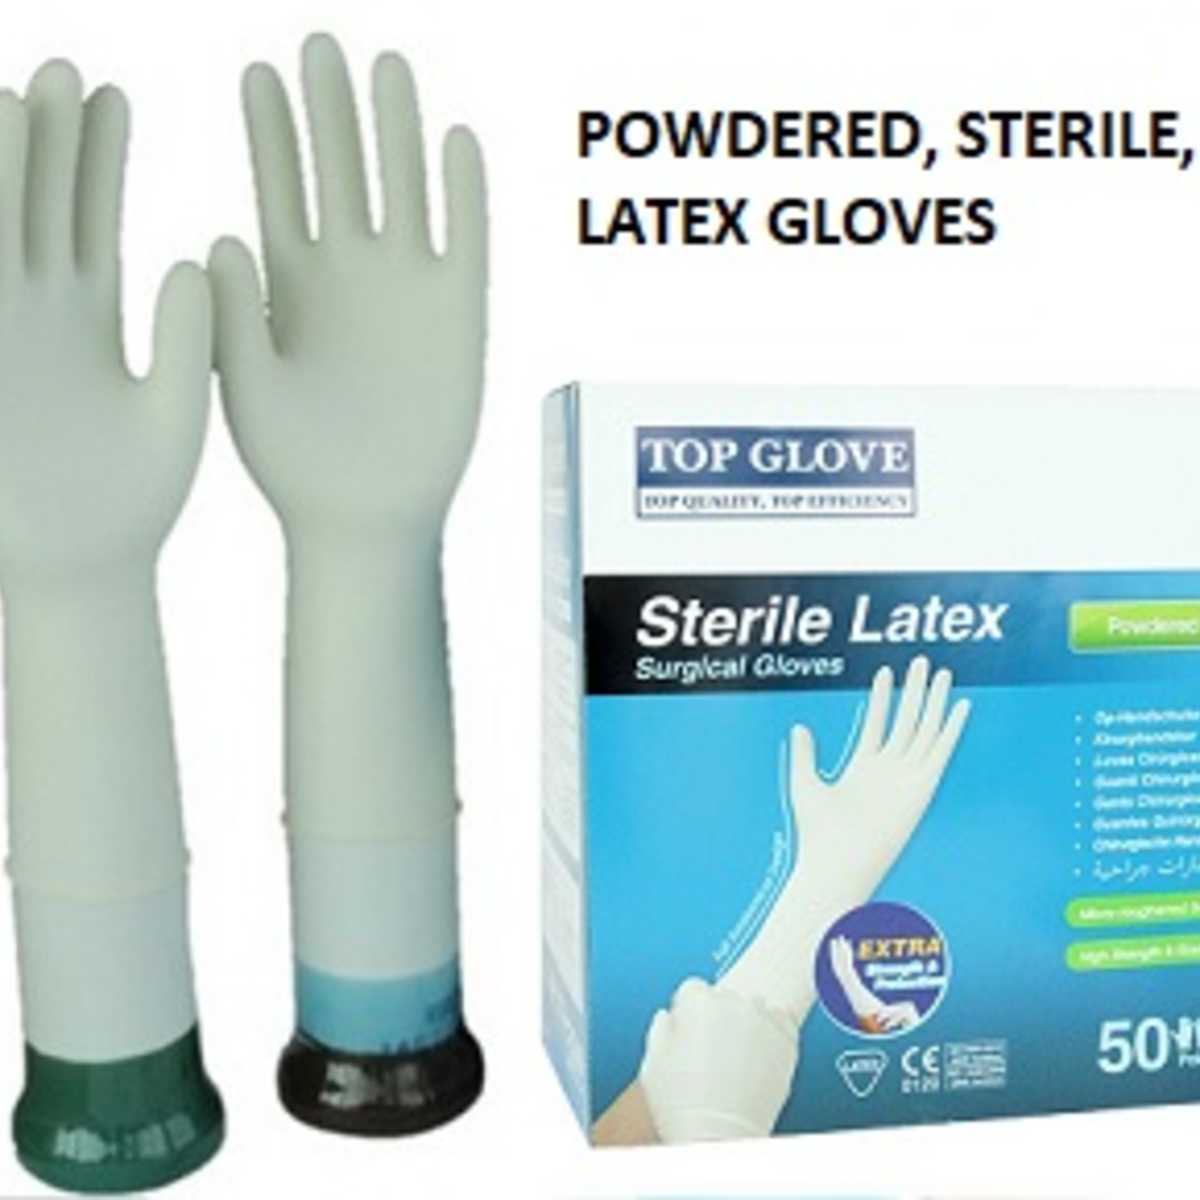 7.5 Sterile Latex Surgical Glove, Powdered